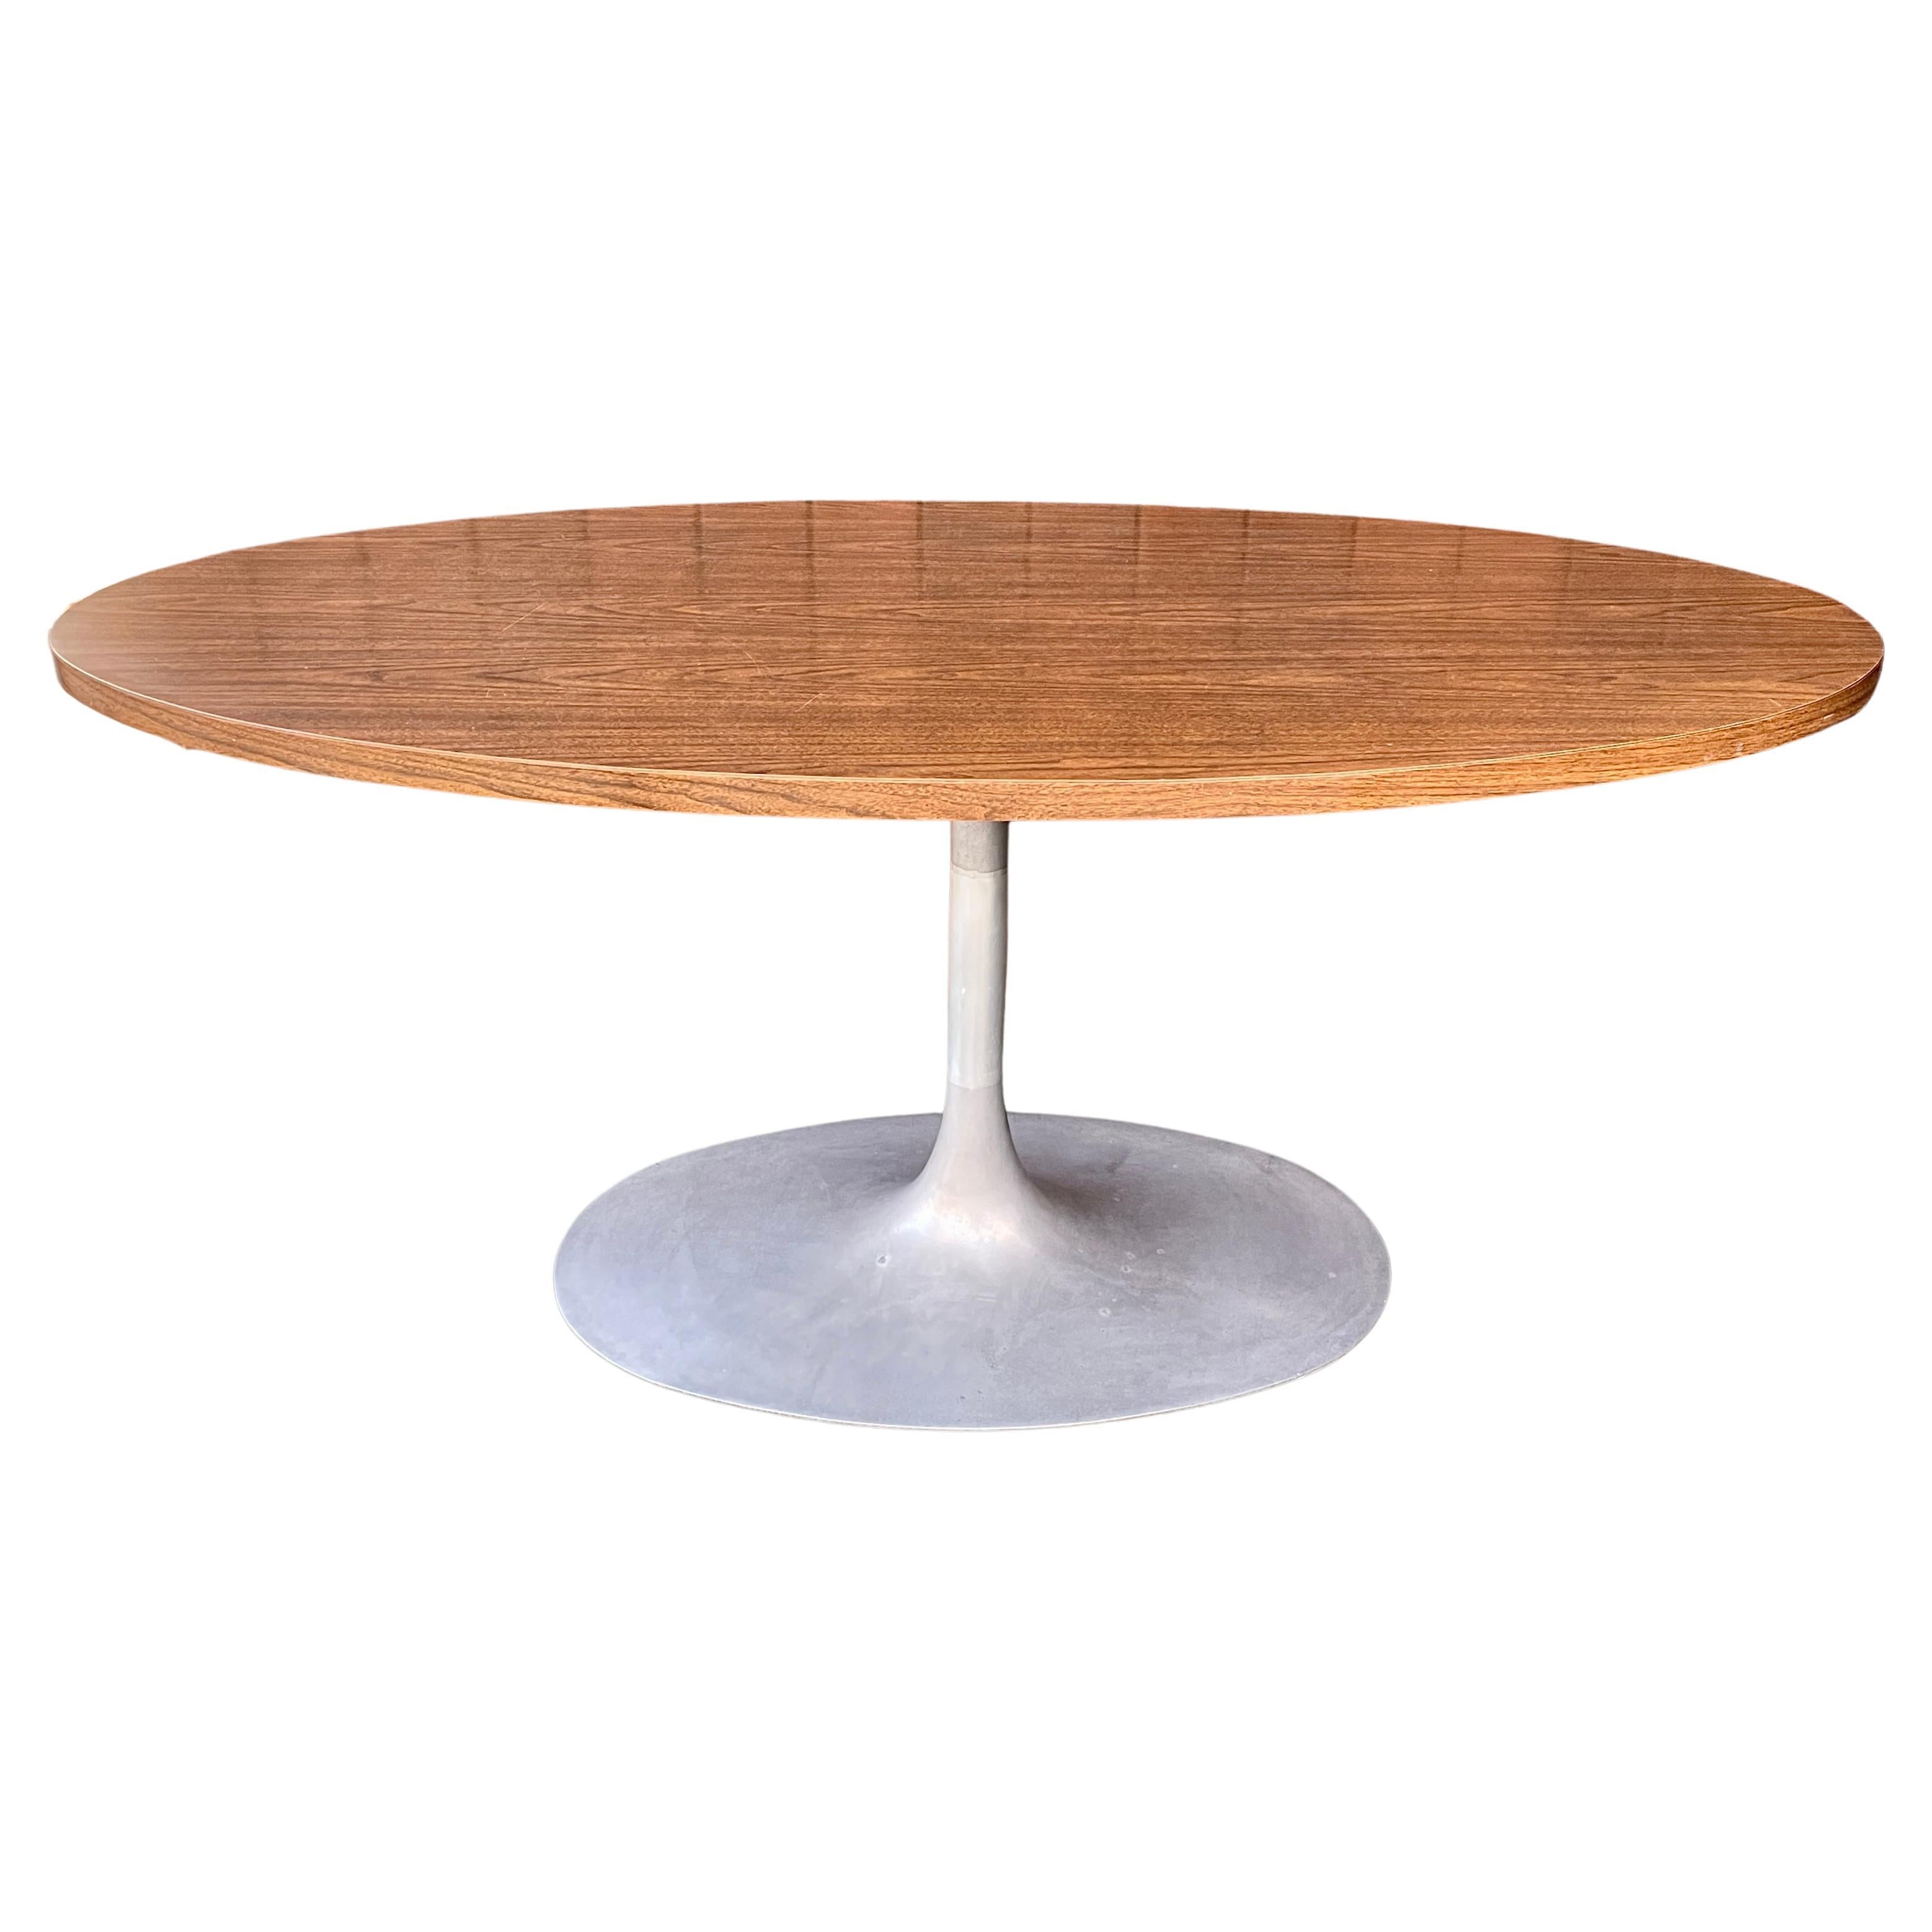 XL Oval Tulip Dining Table Space Age Jetsons Vintage Mid-Century Burke Arkana For Sale